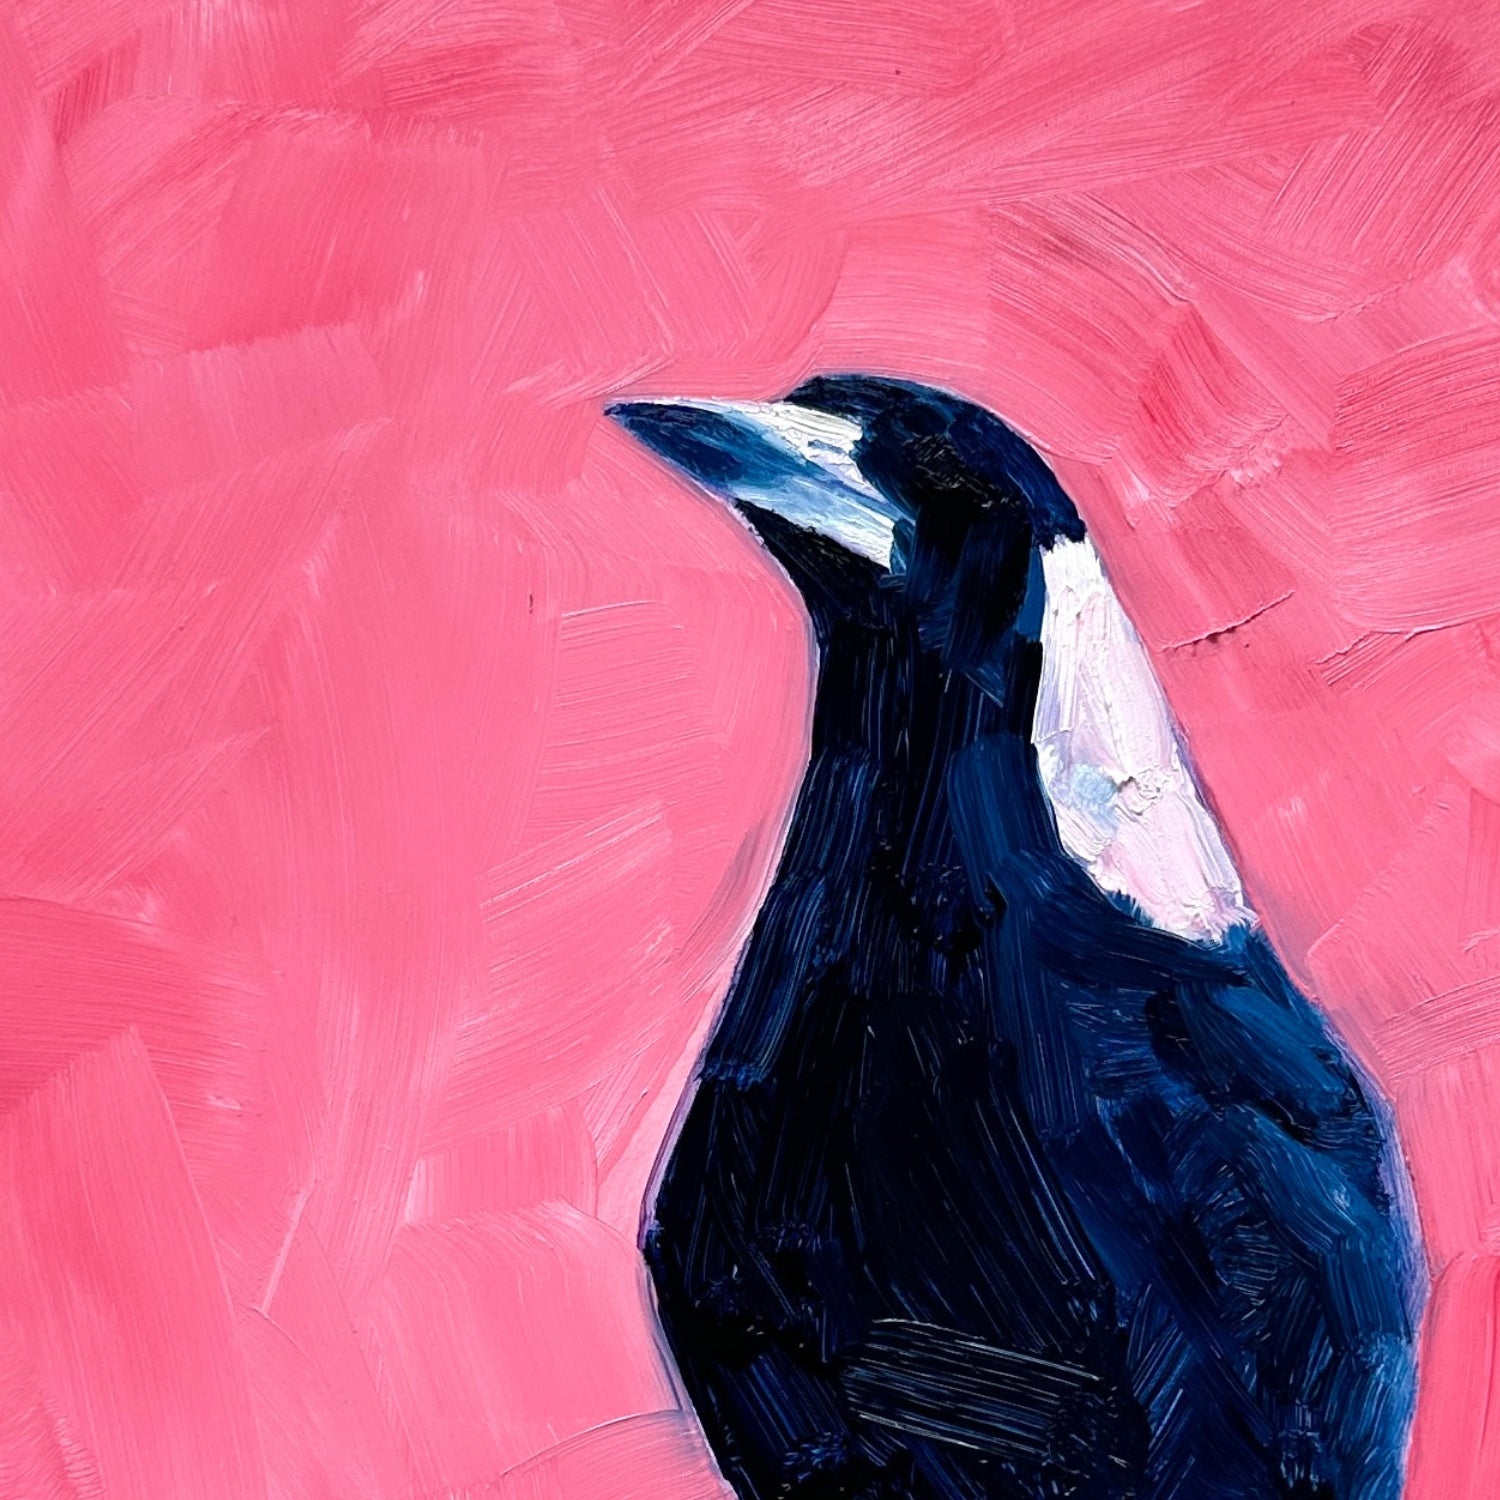 closeup of a fine art contemporary original oil painting of a navy blue and white magpie on a textured pink background